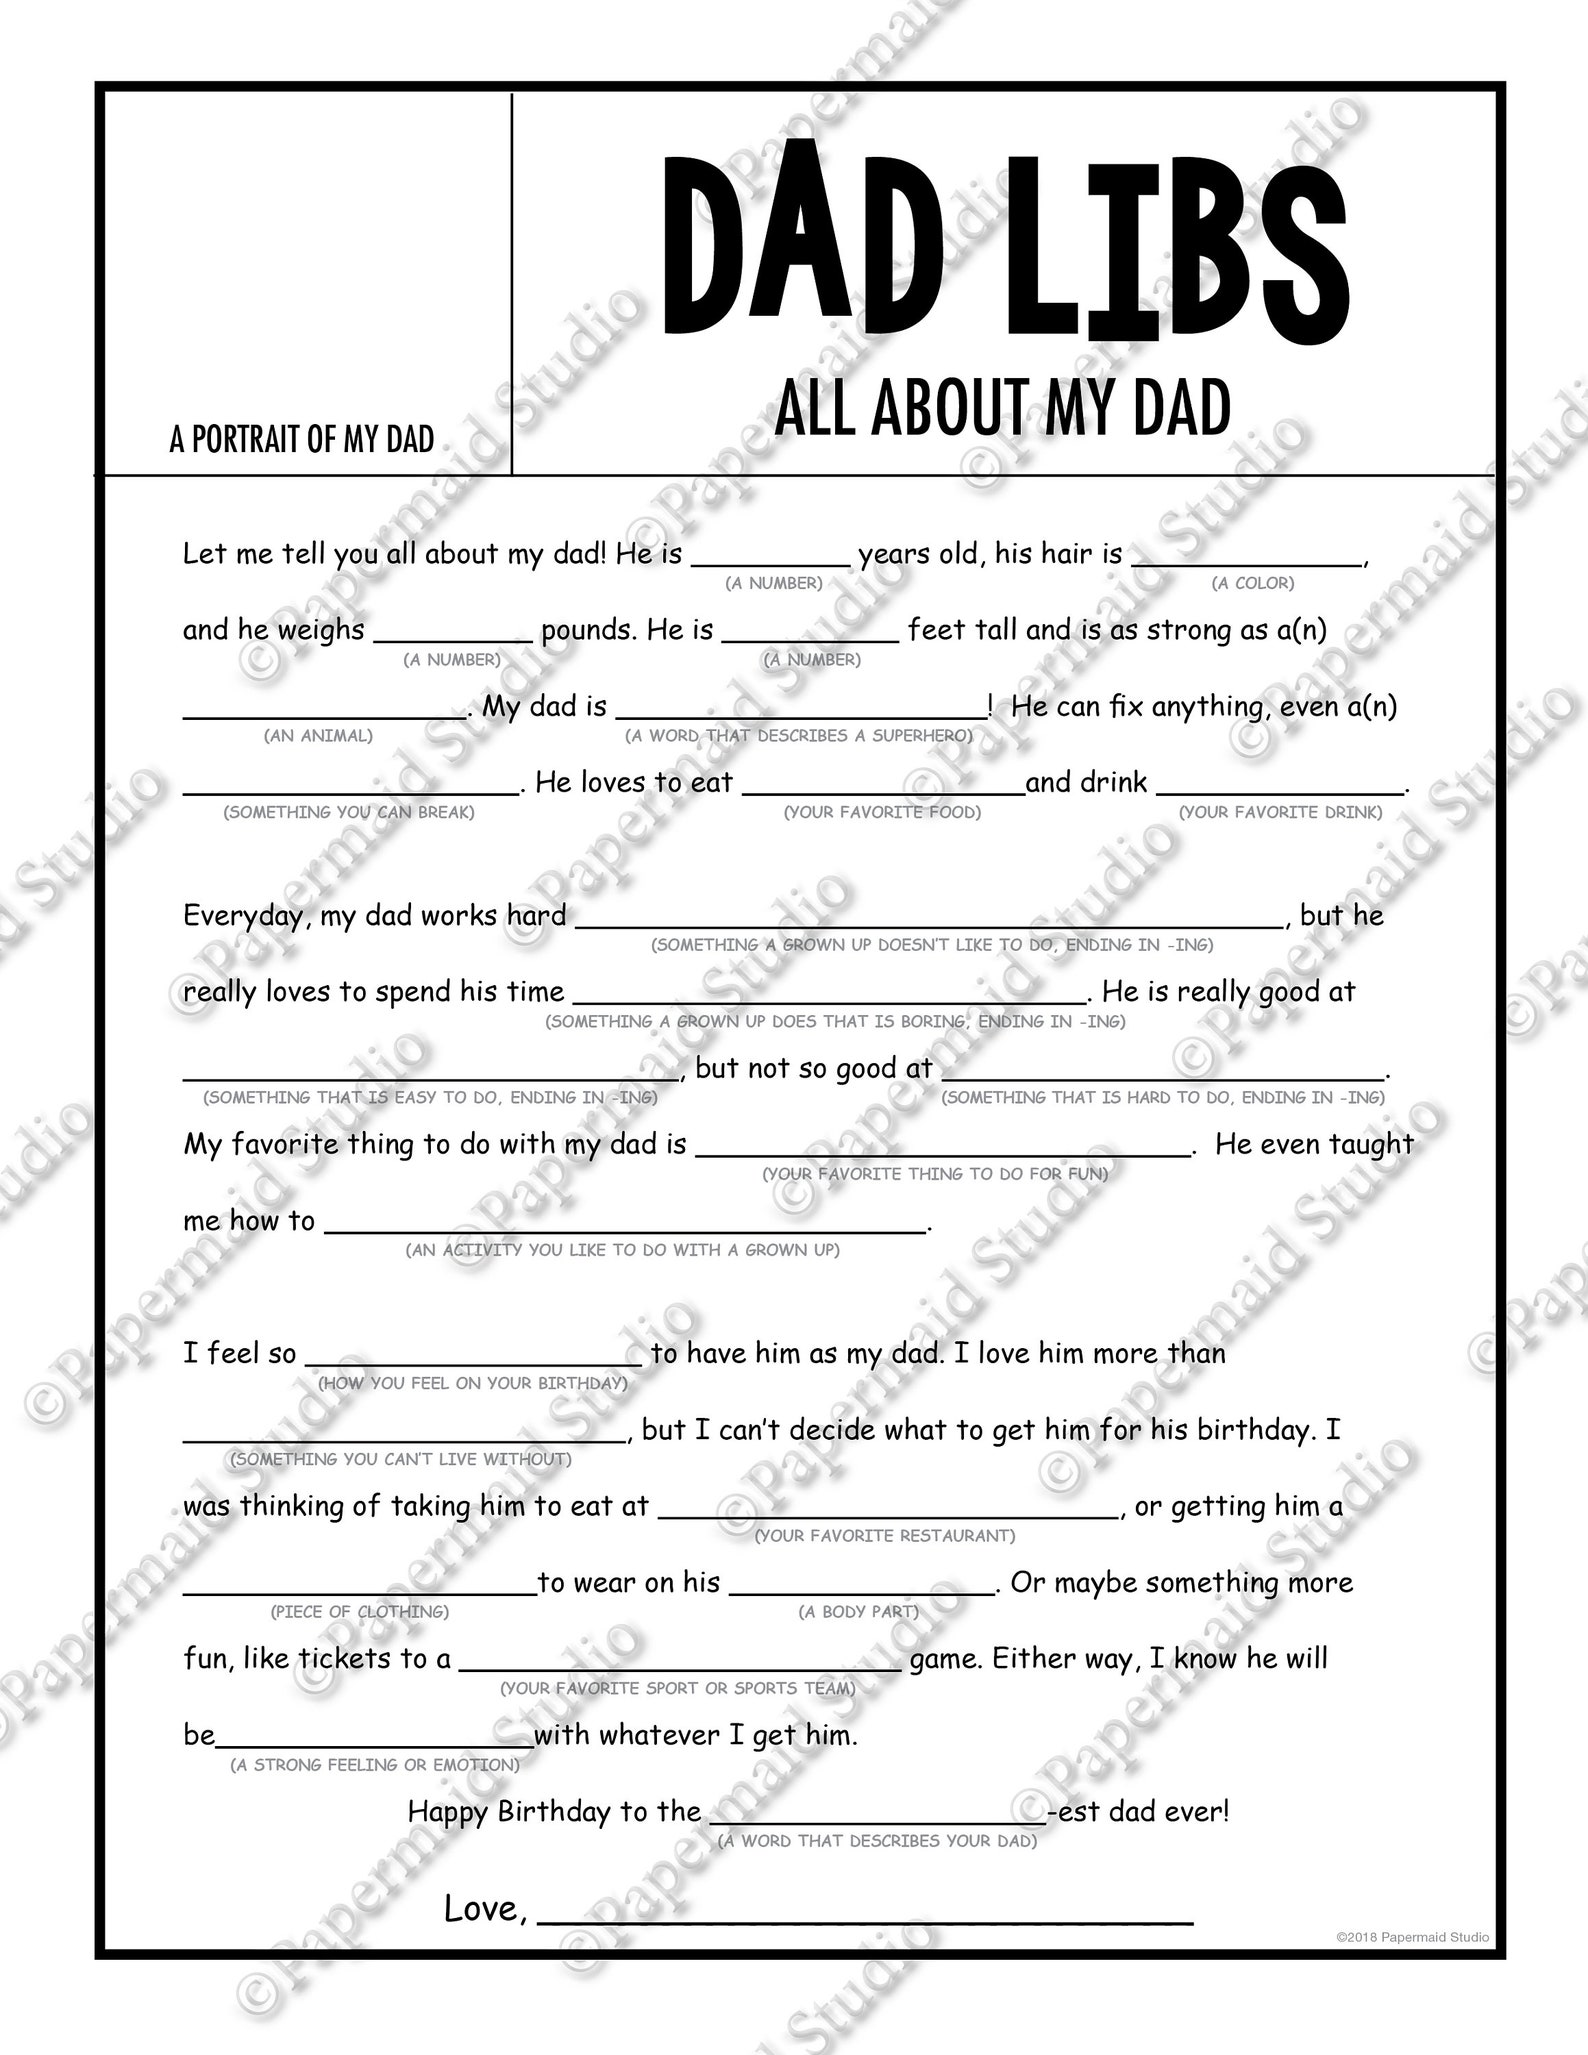 printable-all-about-my-dad-fill-in-the-blank-gift-funny-etsy